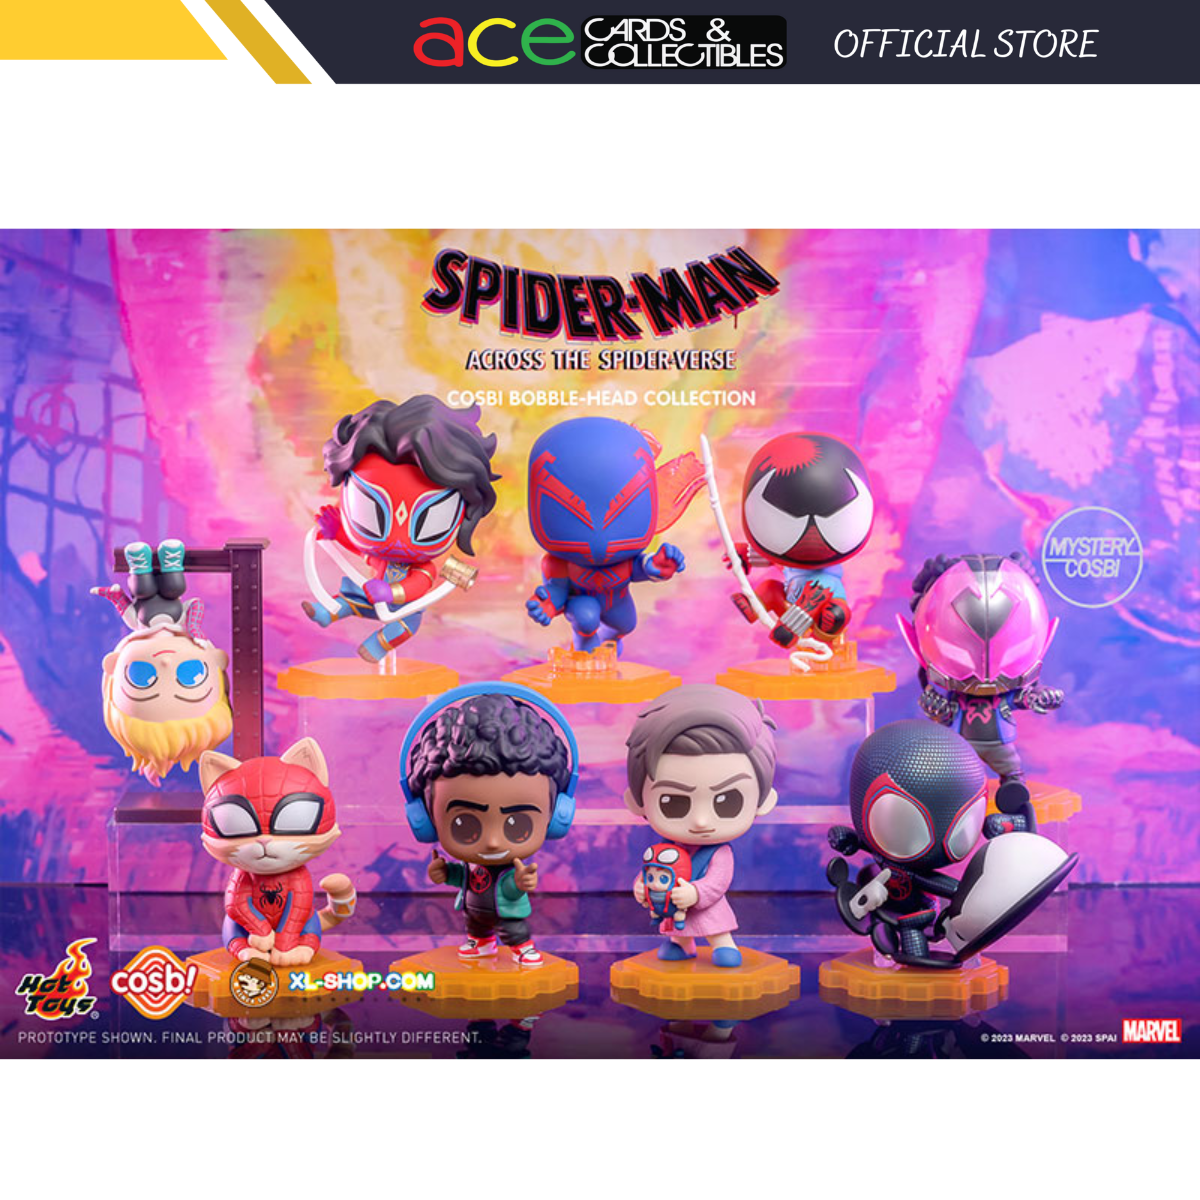 Spider-Man: Across The Spider-Verse Cosbi Bobble-Head Collection Series 2-Single Box (Random)-Marvel Comics-Ace Cards & Collectibles